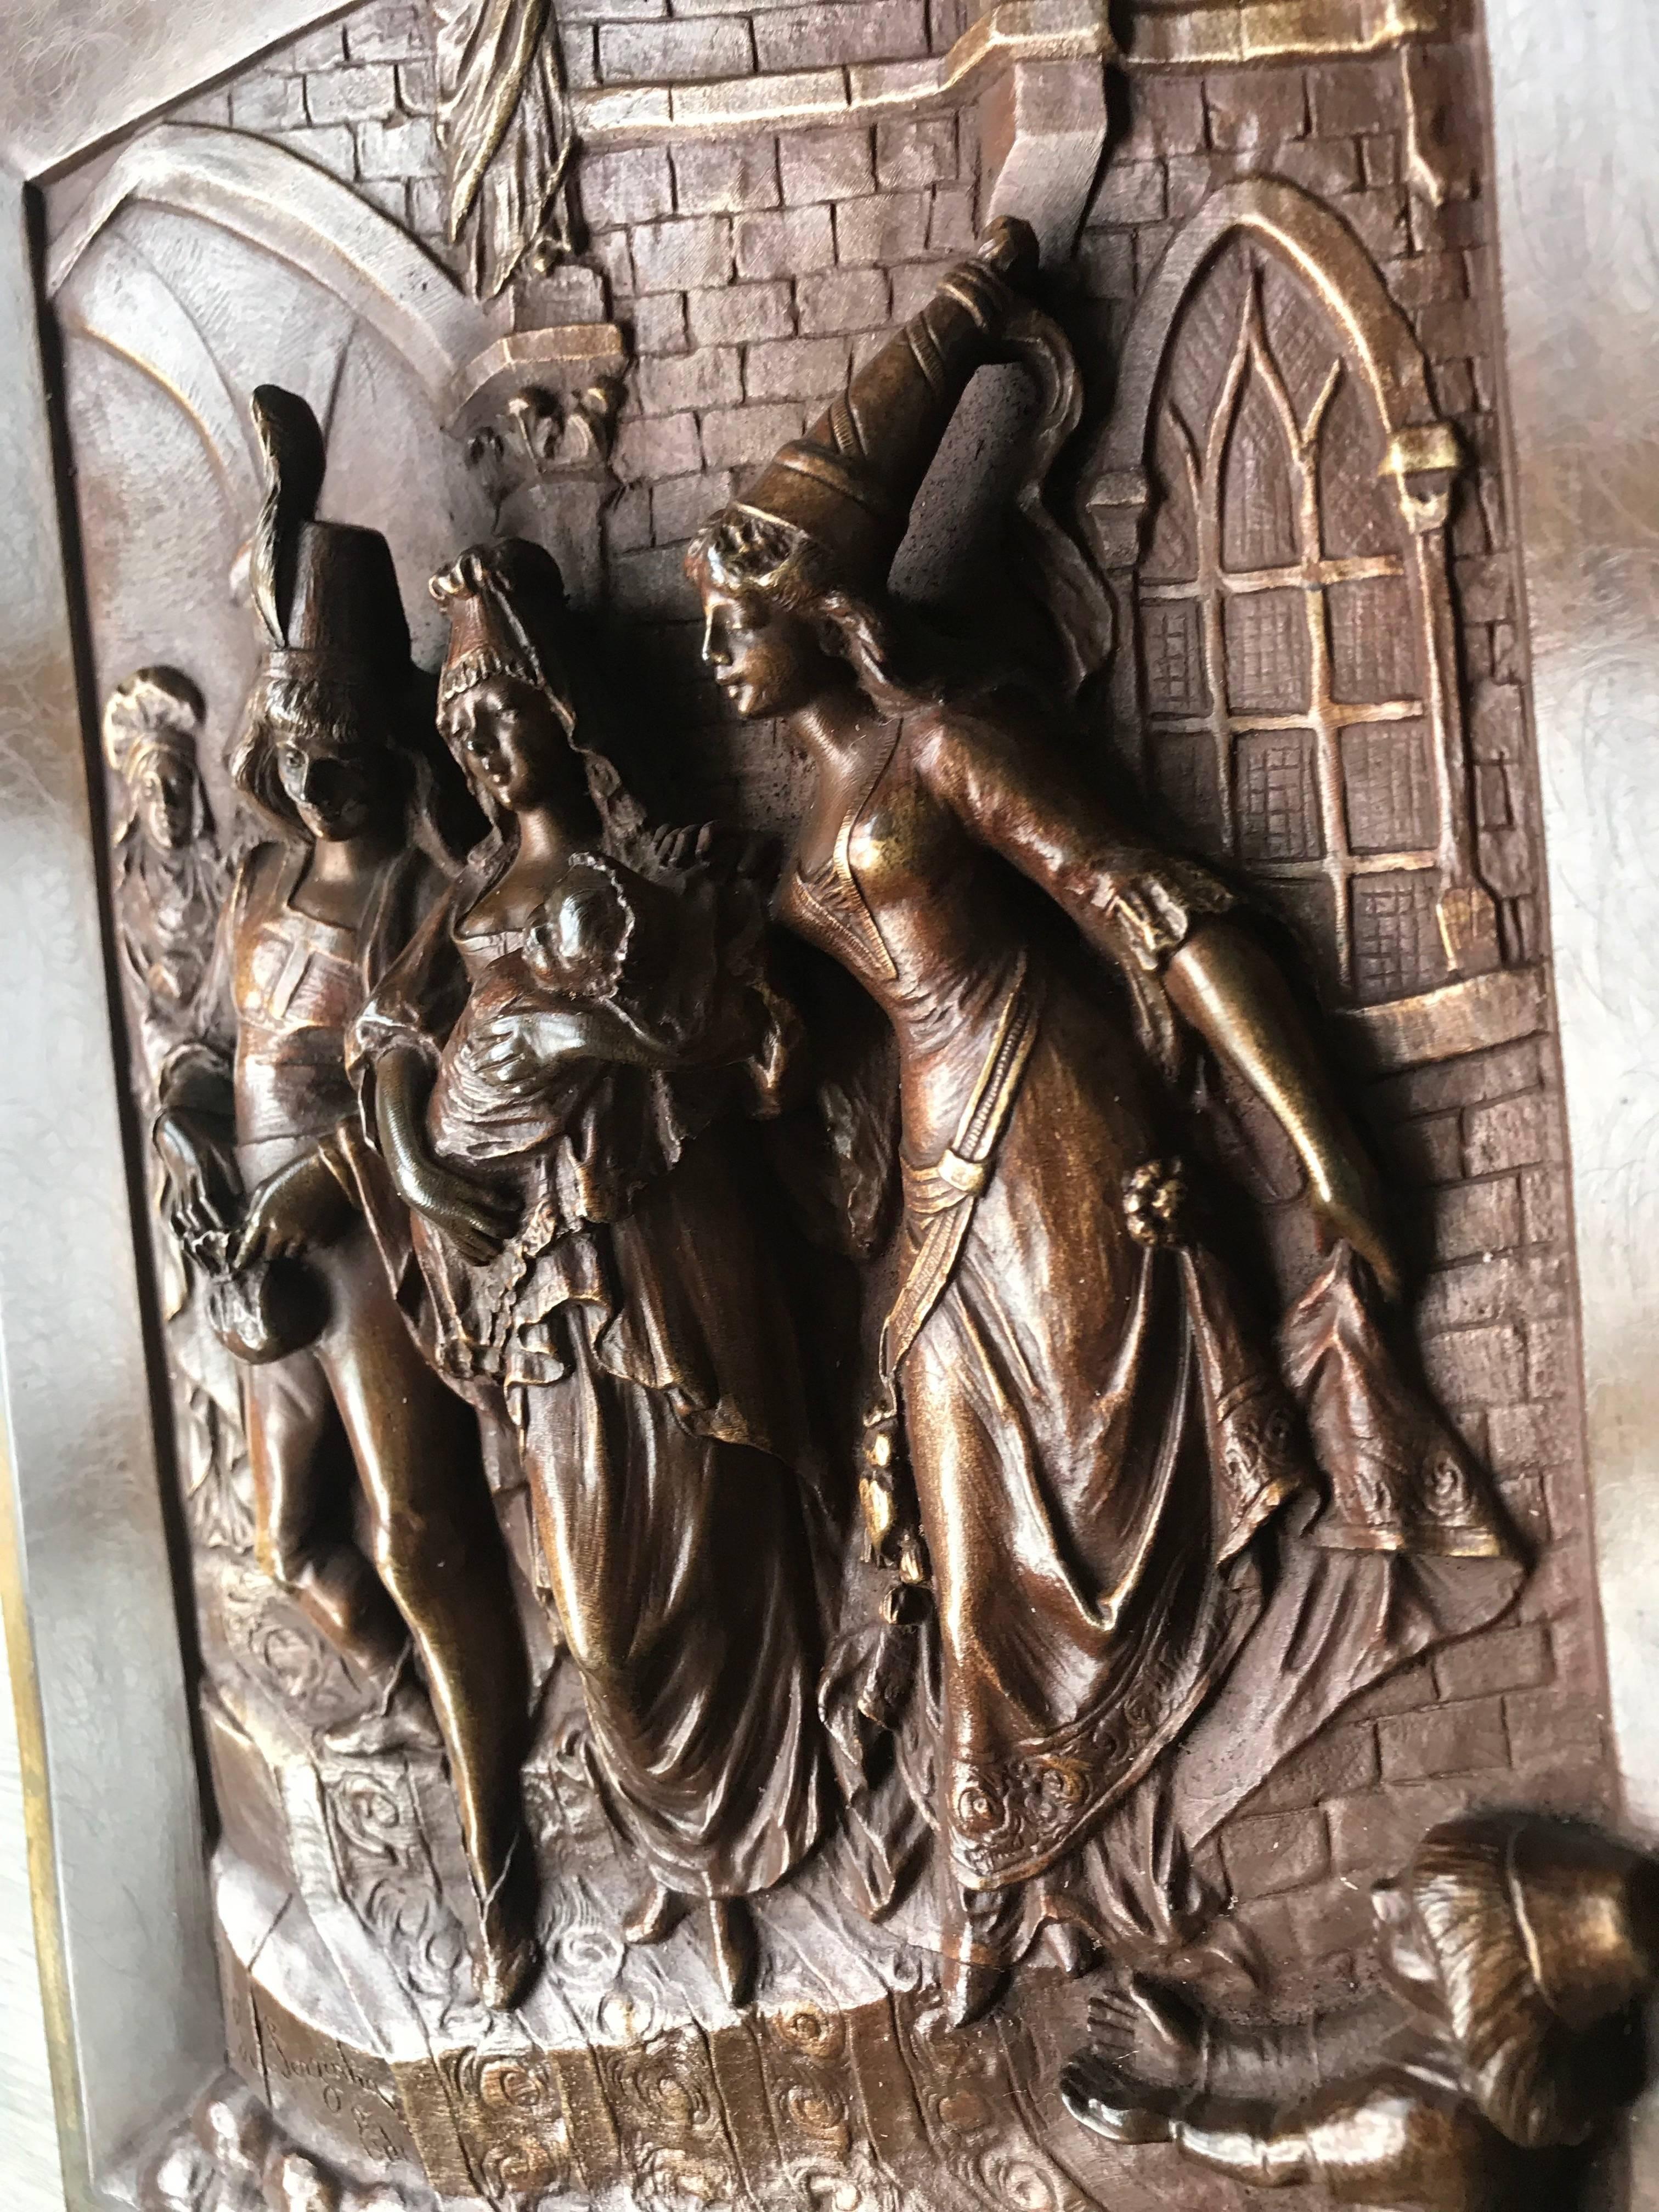 Hand-Crafted Late 1800s Bronze Wall Plaque by Leon Perzinka Depicting Birth Scene Celebration